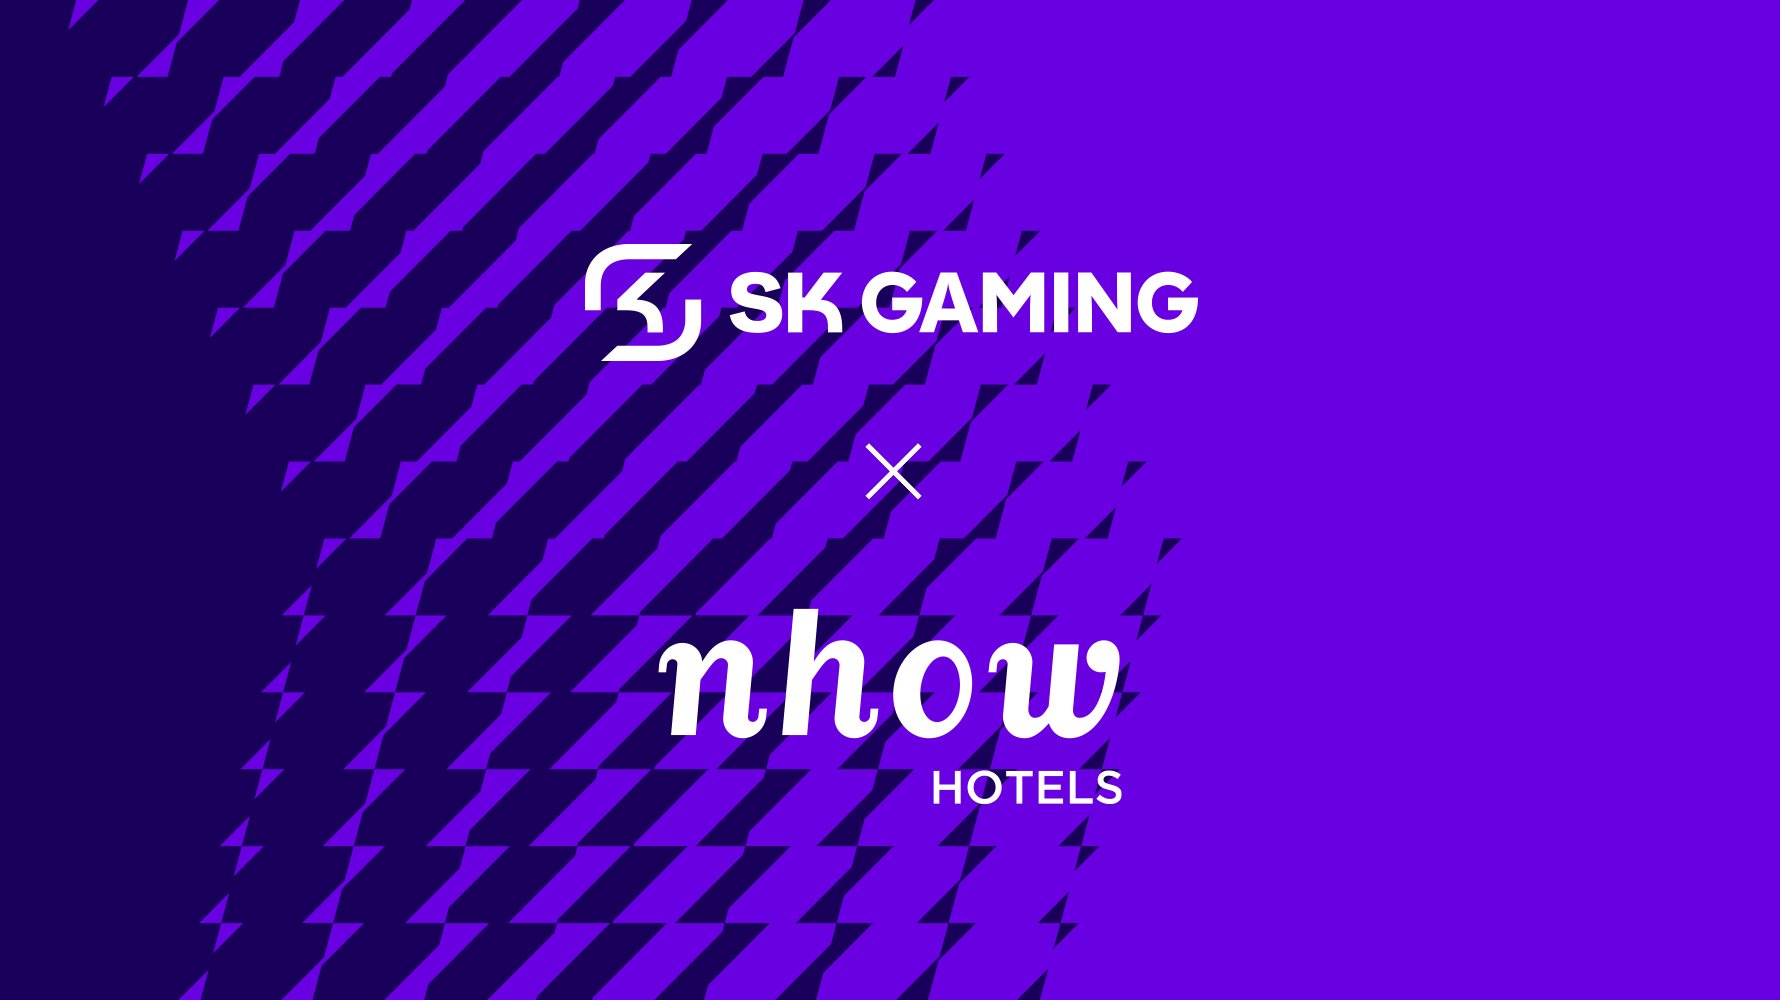 The best place for SK players away from home continues to be nhow Hotels!